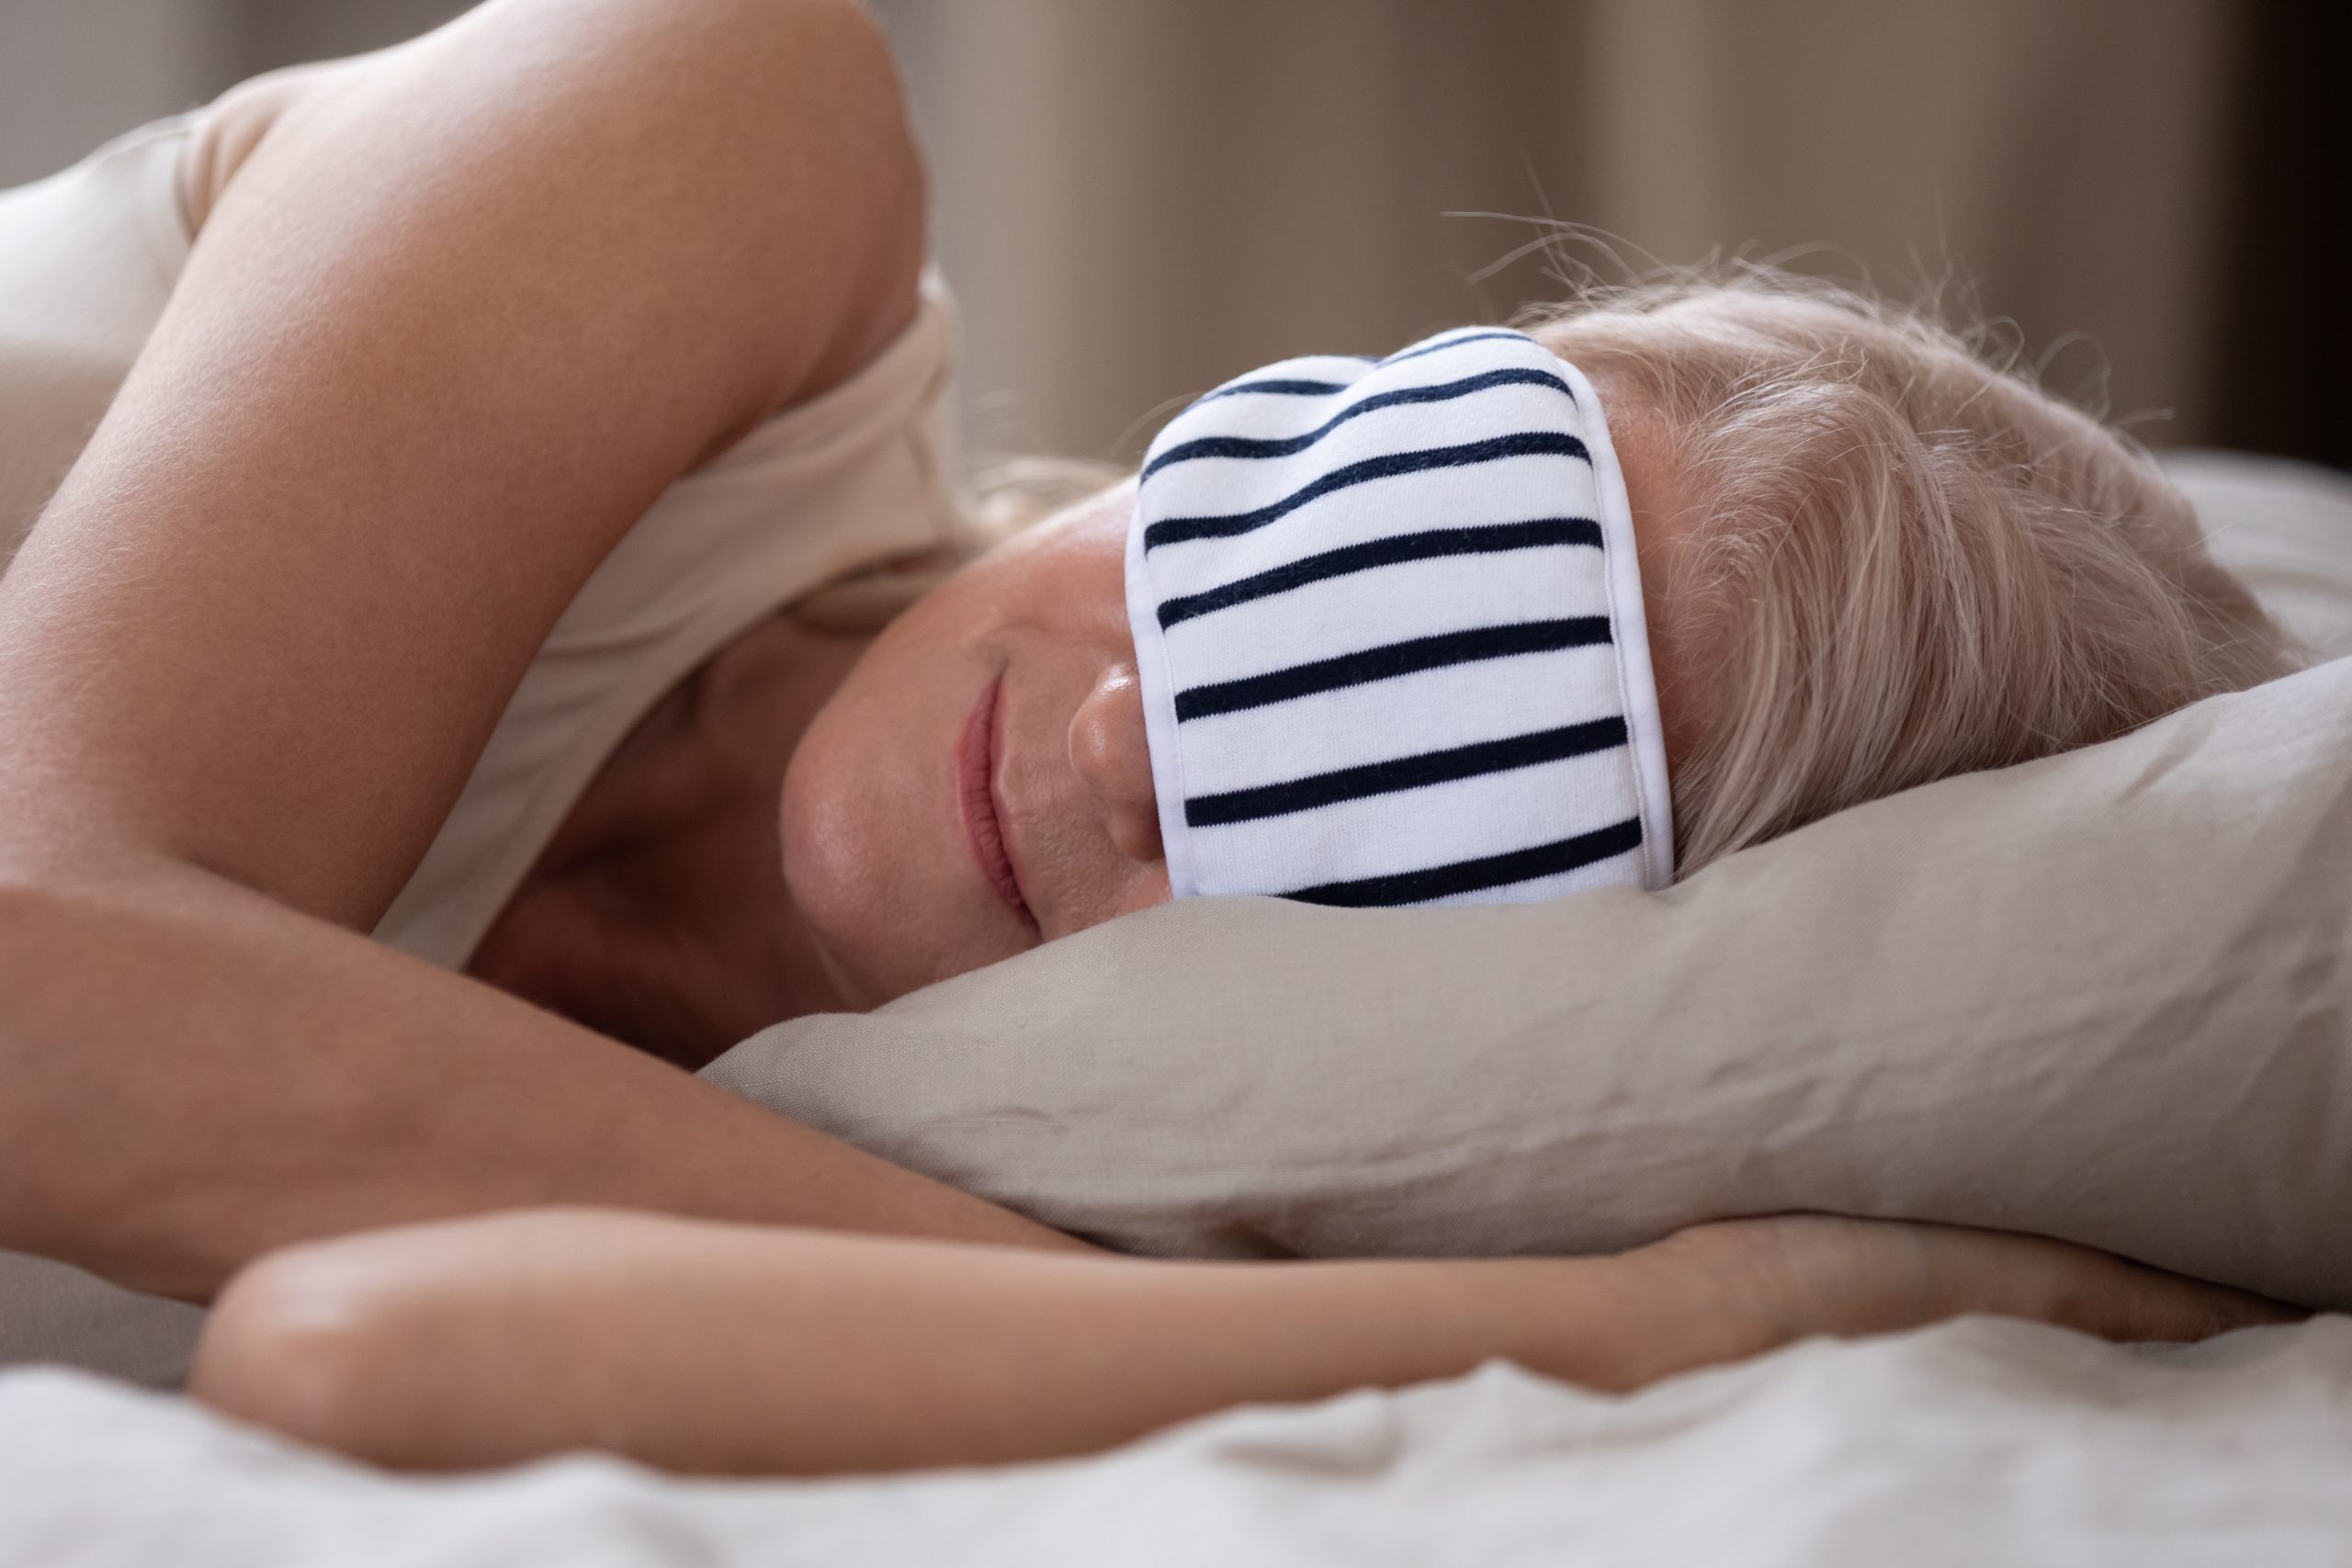 Changes to Medicare for Home Sleep Study Testing